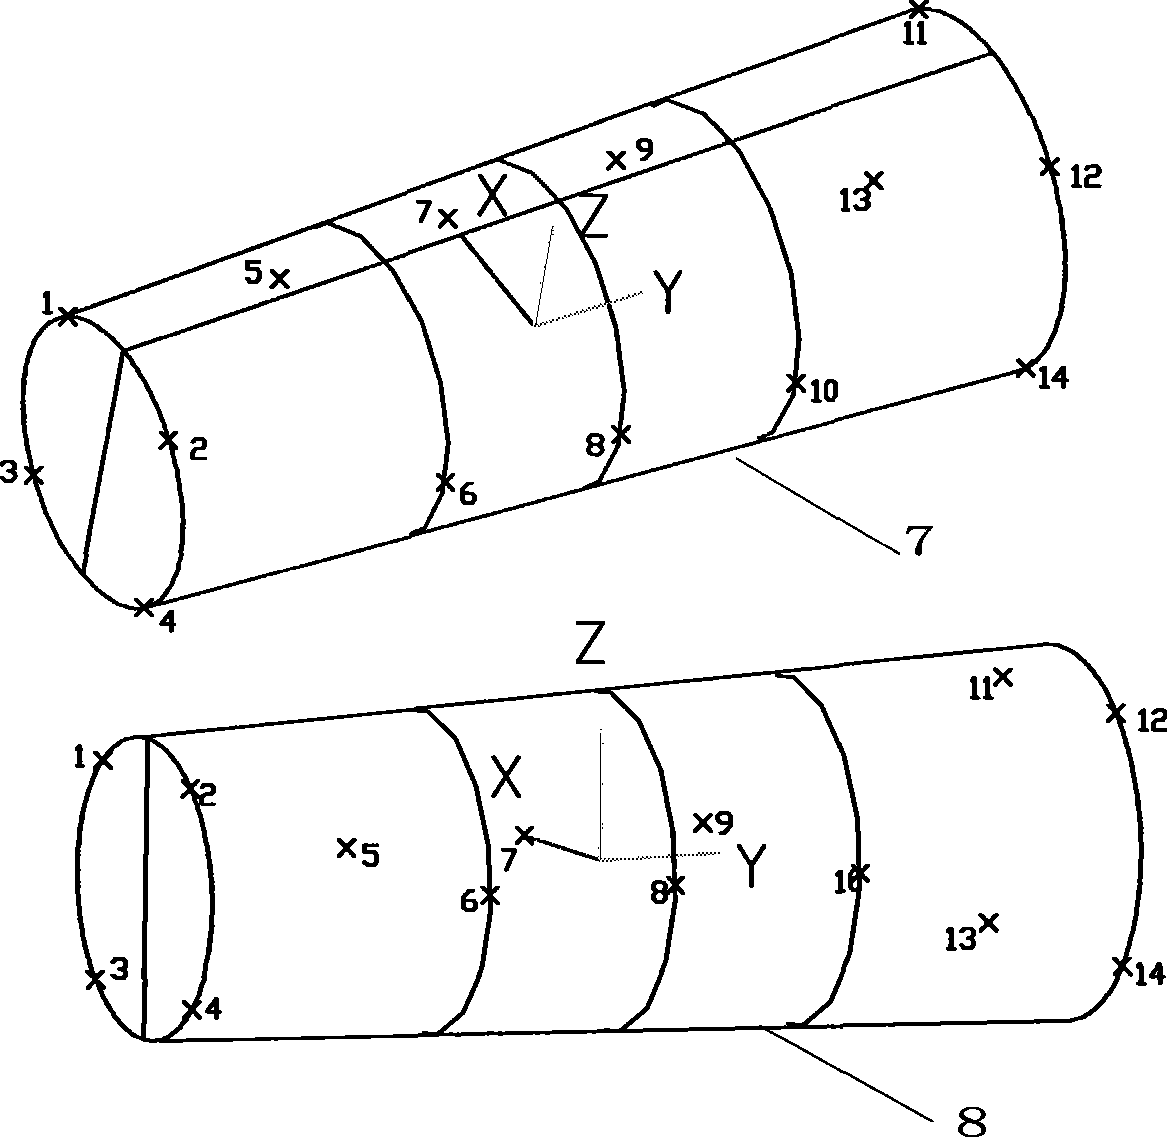 Computation method for attitude of aircraft fuselage based on laser tracking instrument